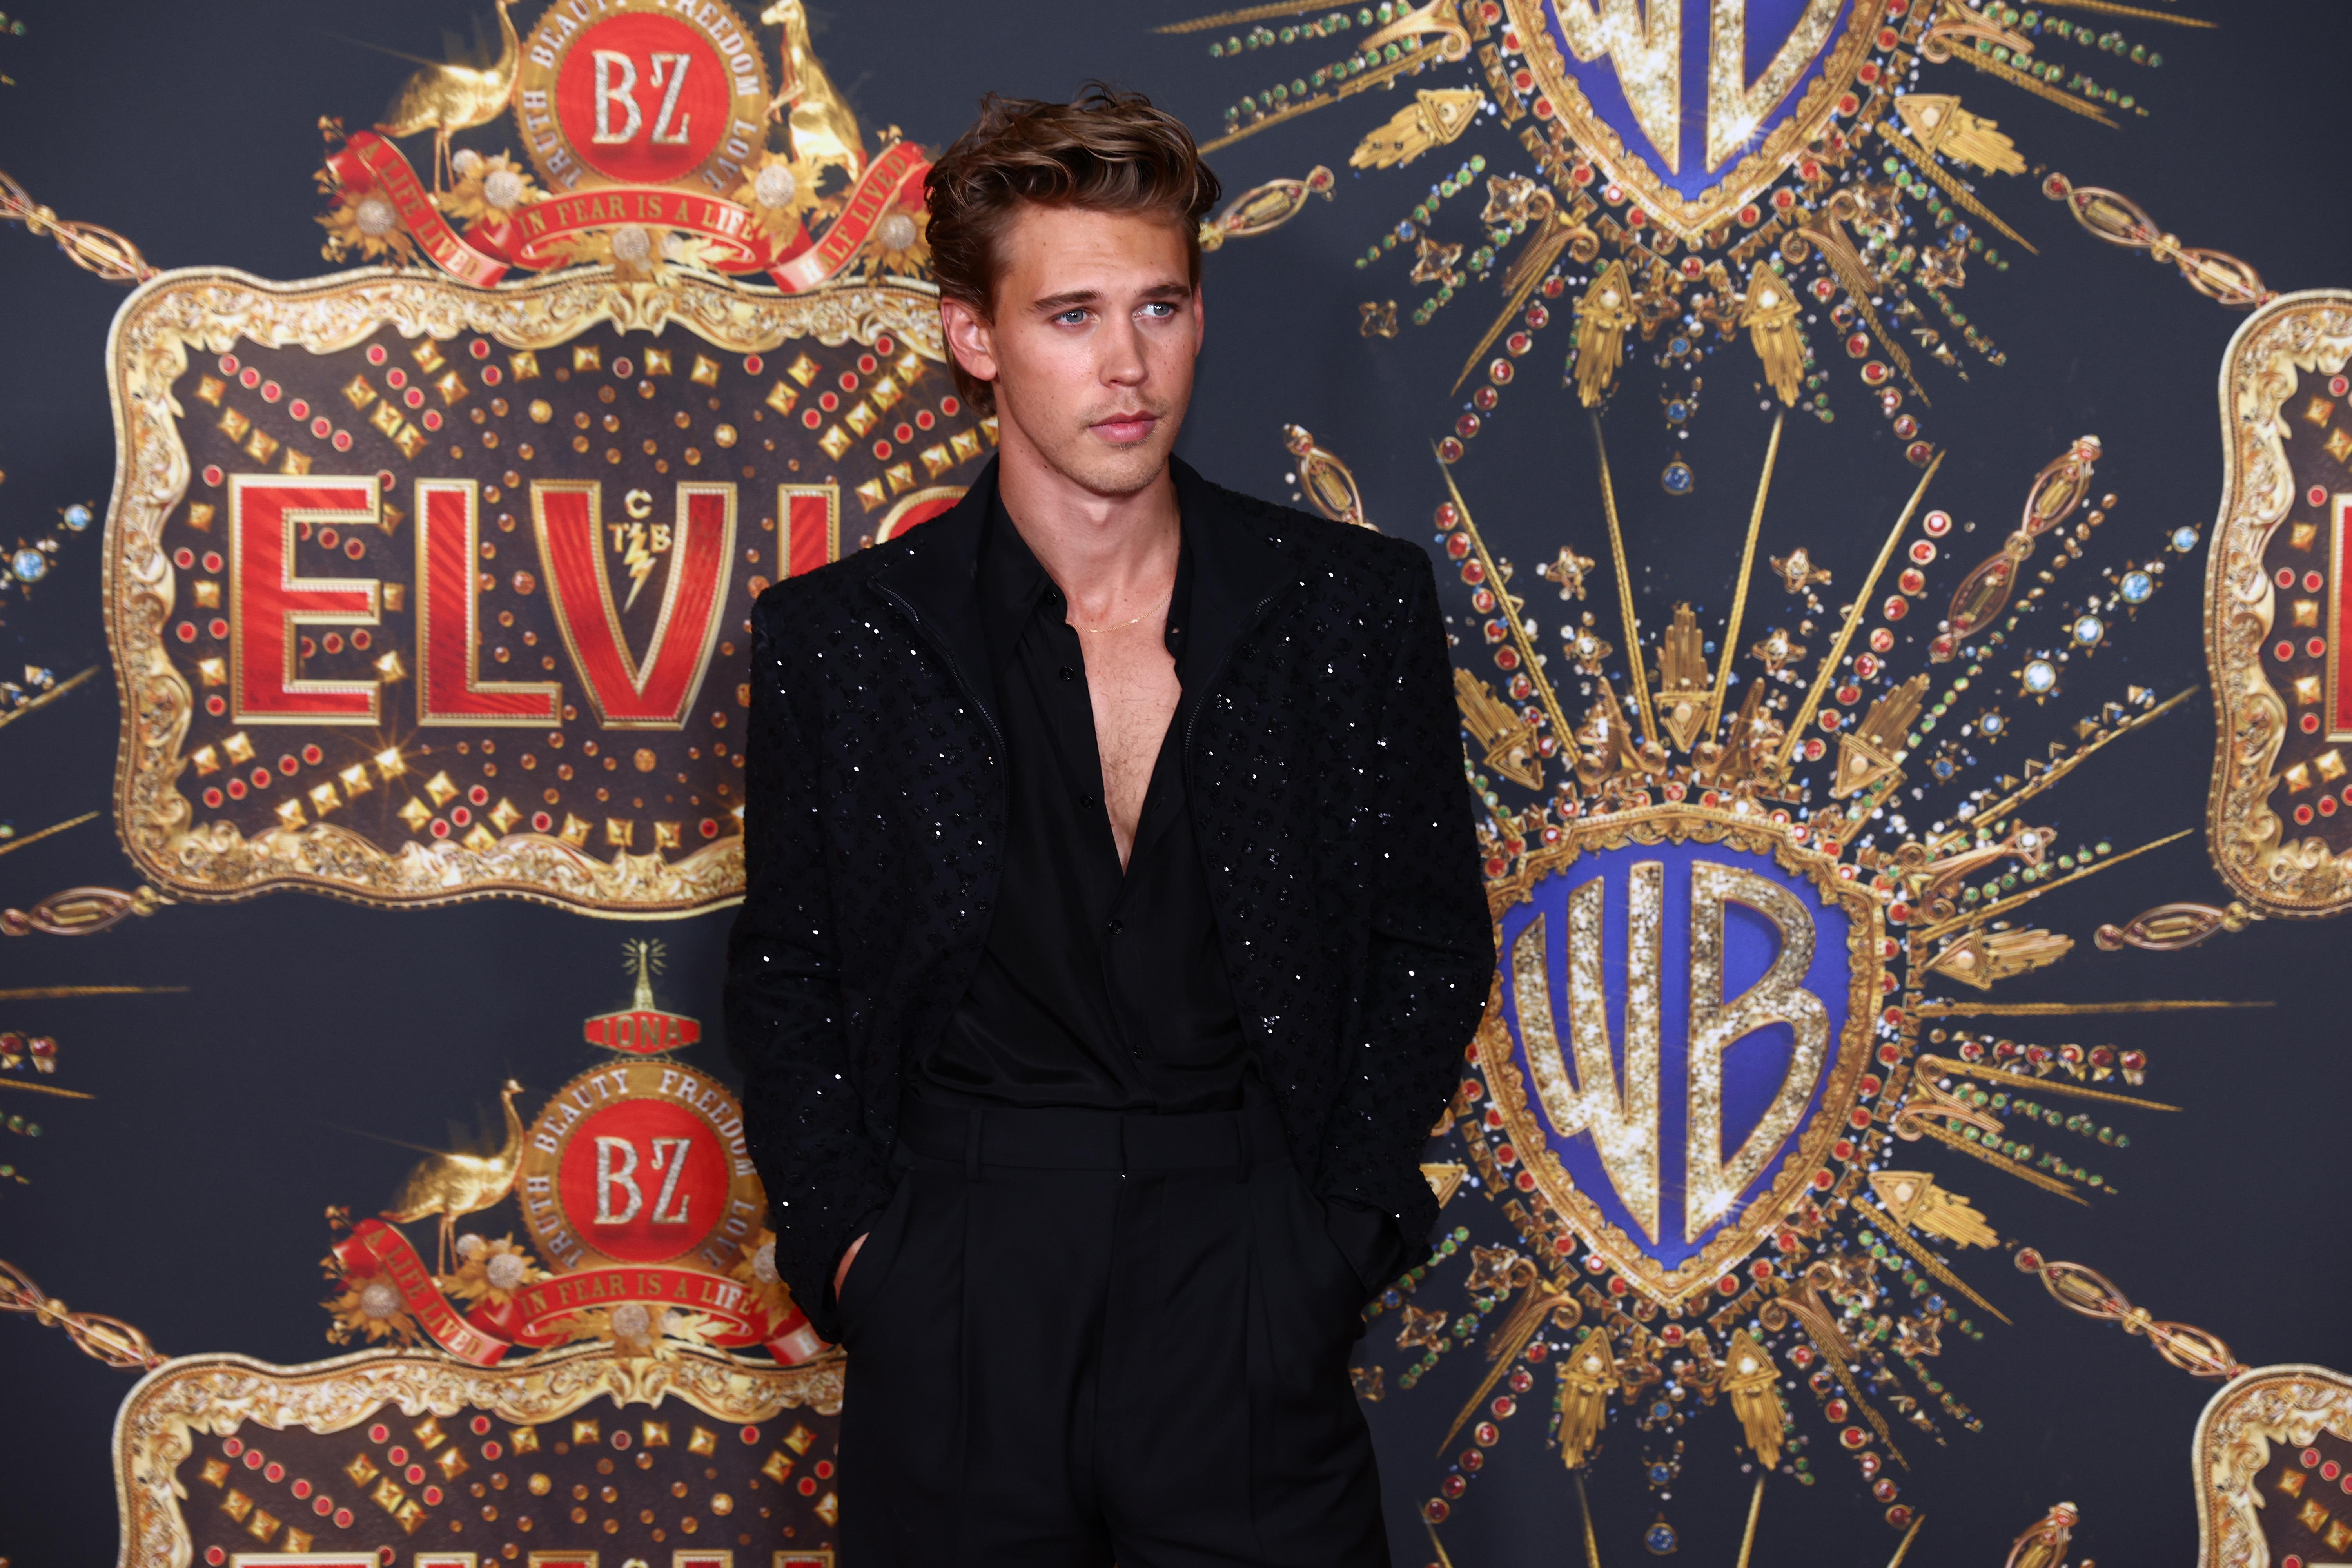 GOLD COAST, AUSTRALIA - JUNE 04: Austin Butler attends the Australian premiere of ELVIS at Event Cinemas Pacific Fair on June 04, 2022 in Gold Coast, Australia. (Photo by Chris Hyde/Getty Images)